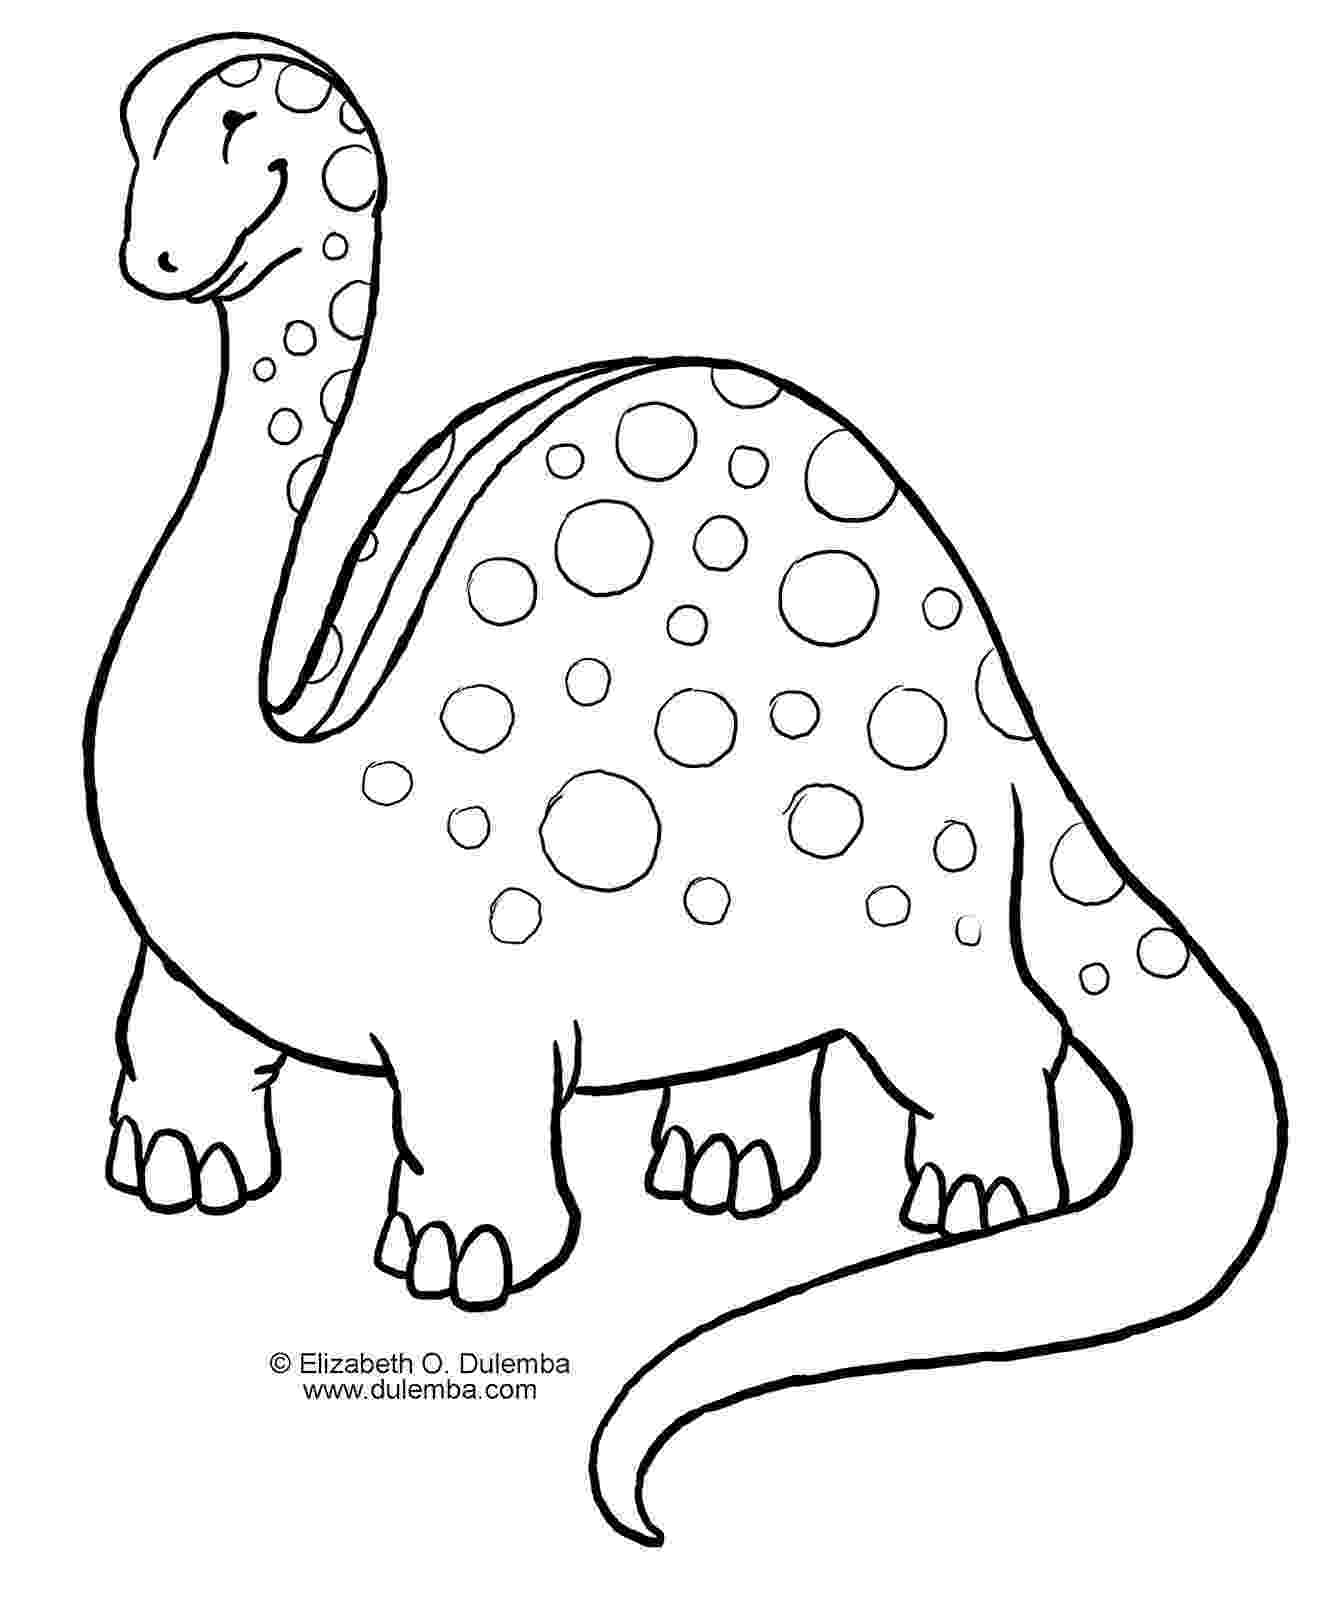 colouring pages dinosaurs printable free coloring pages printable pictures to color kids printable colouring pages dinosaurs 